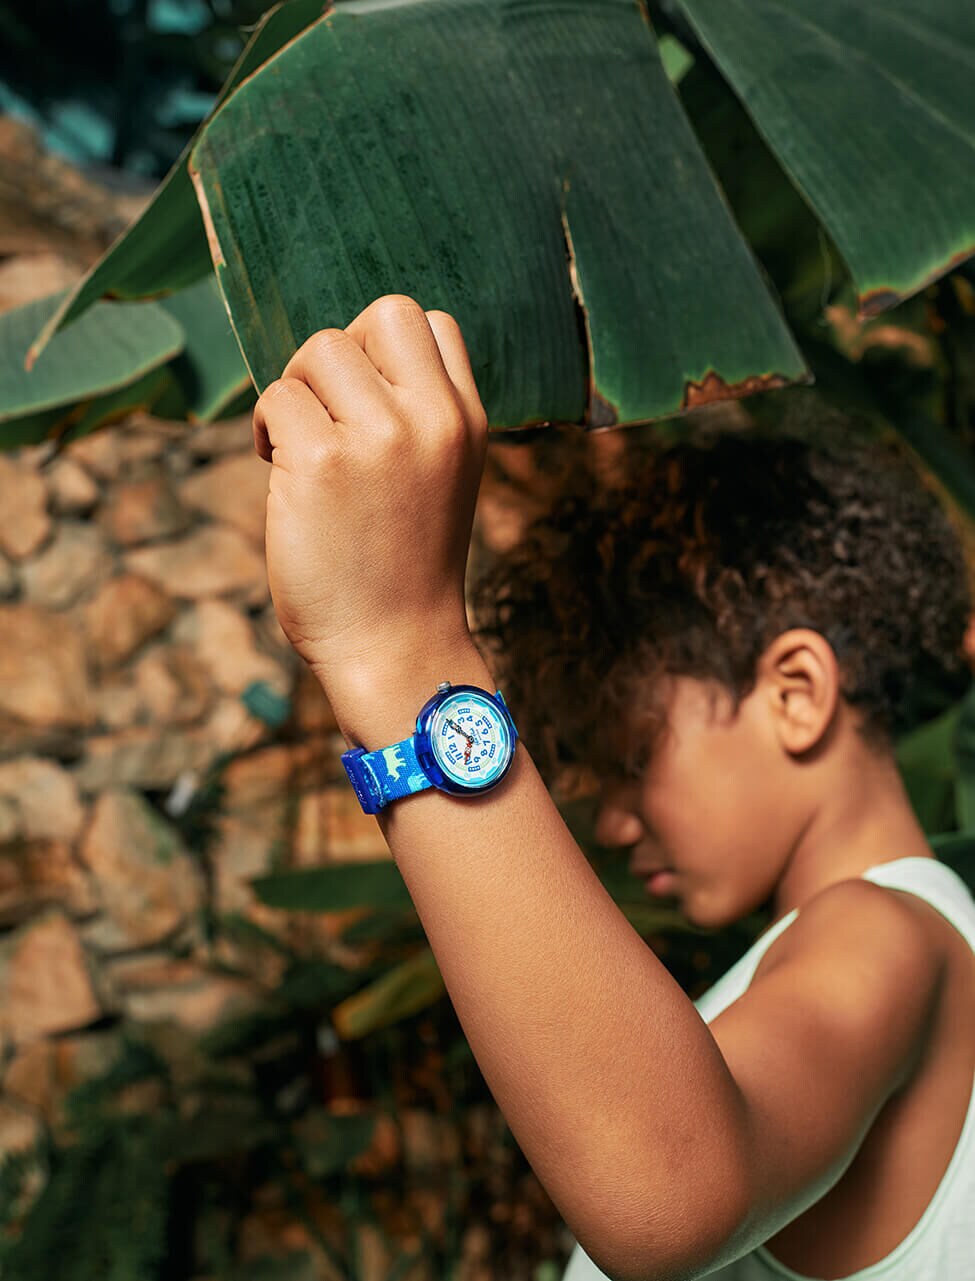 Kid wearing a watch from the collection Goes Wild